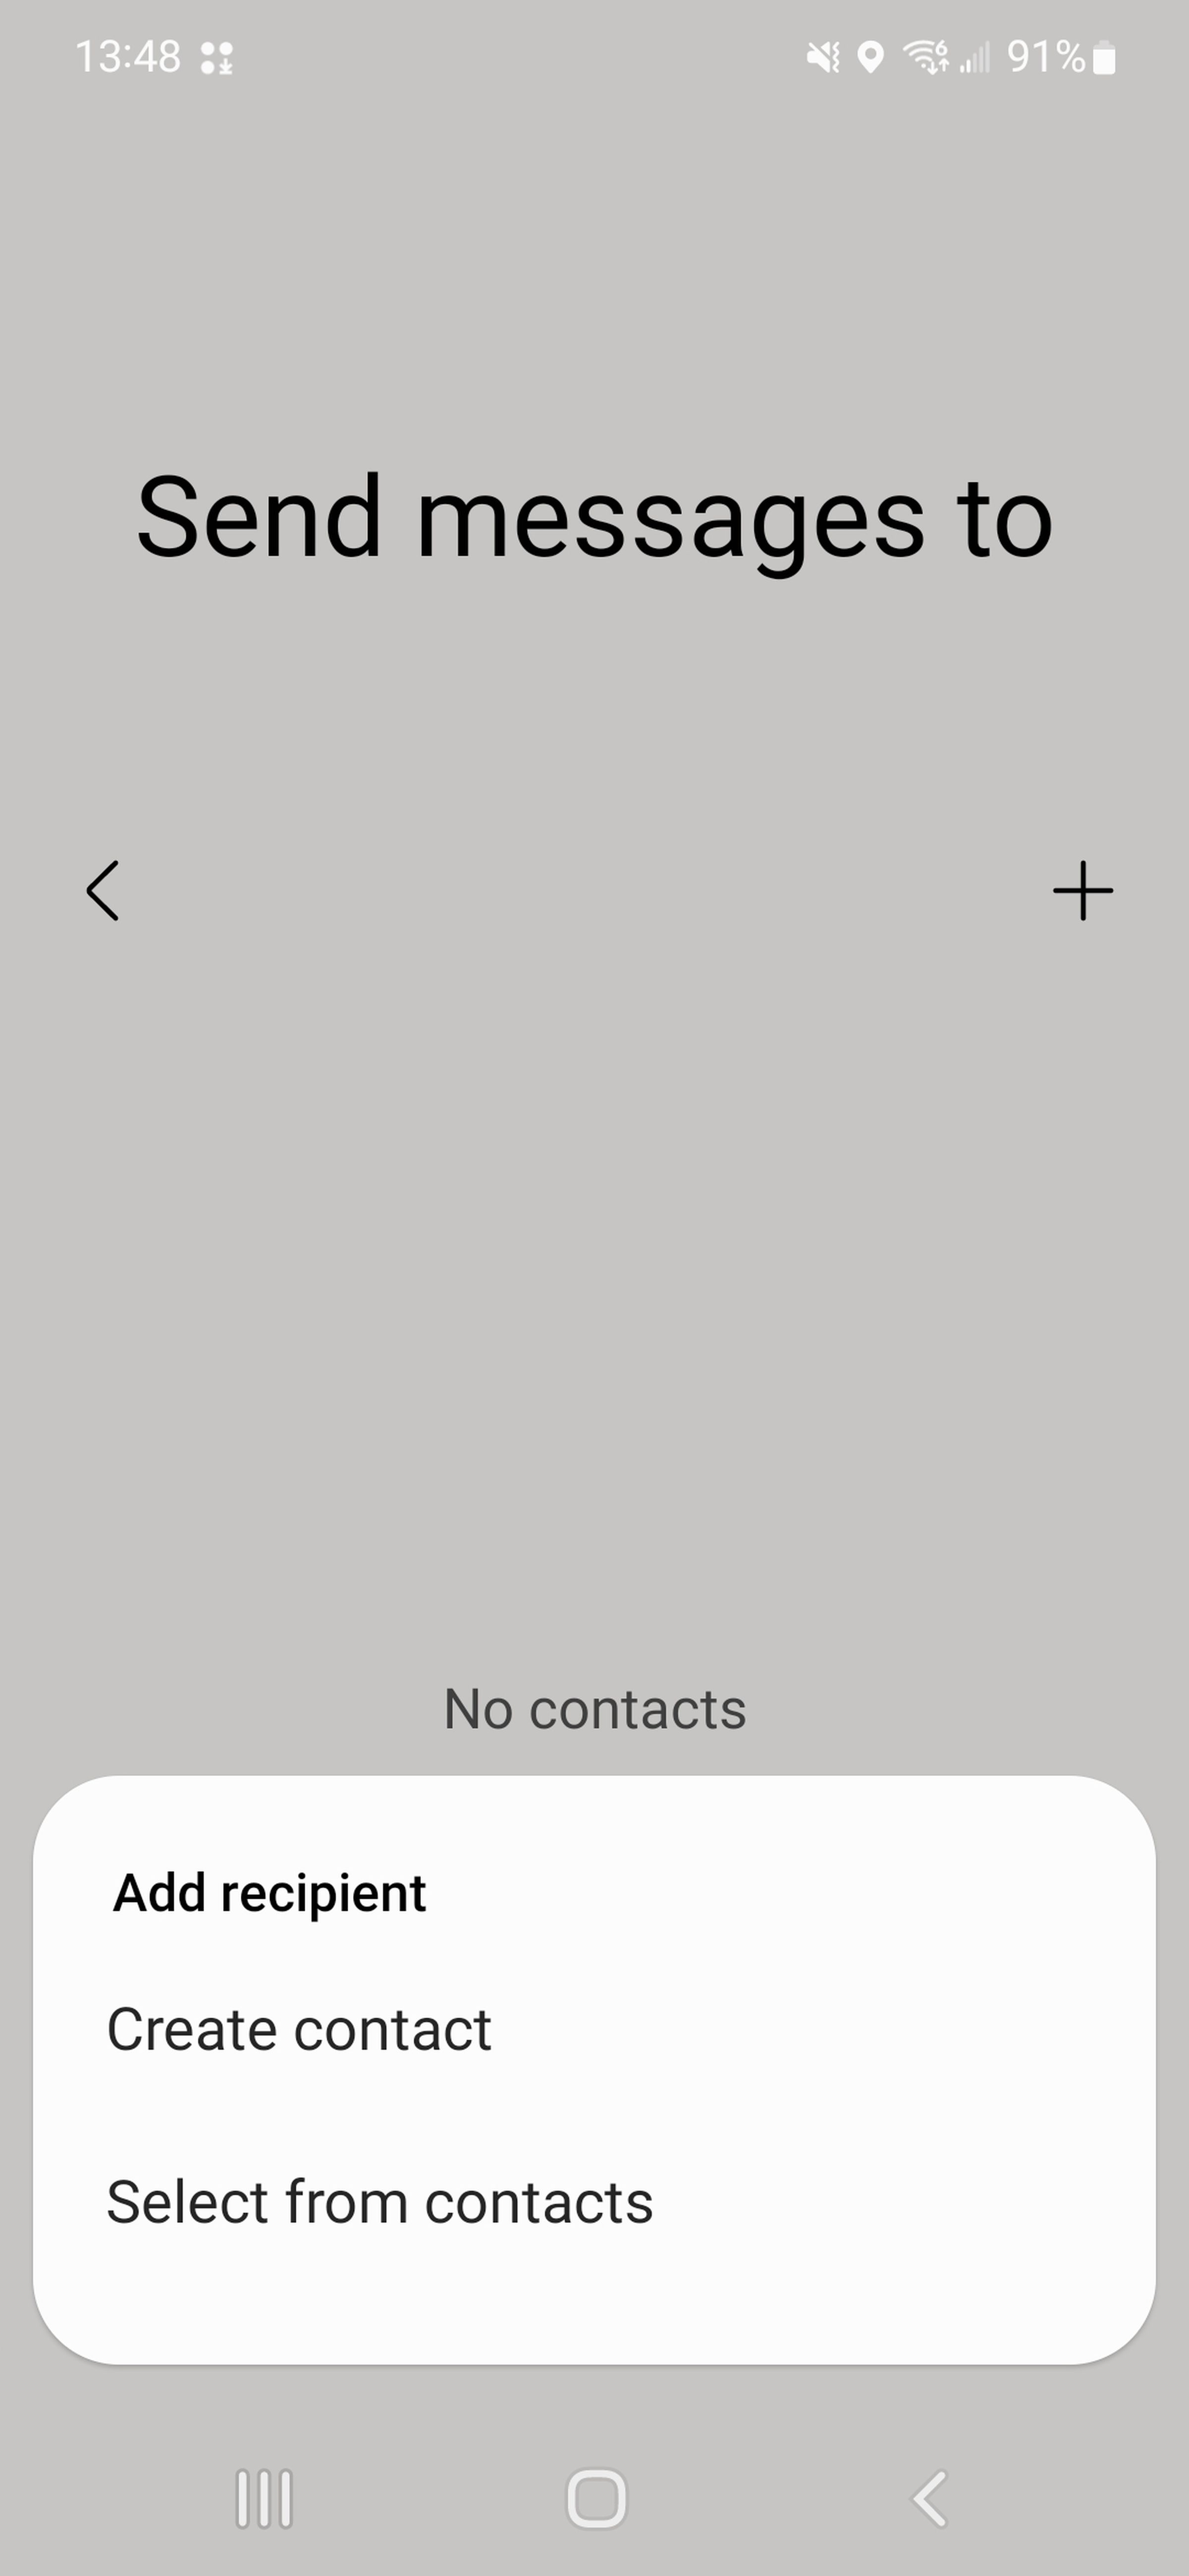 Screenshot showing a dialog box that says “Add recipient, with “Create contact” and “Select from contacts” buttons.